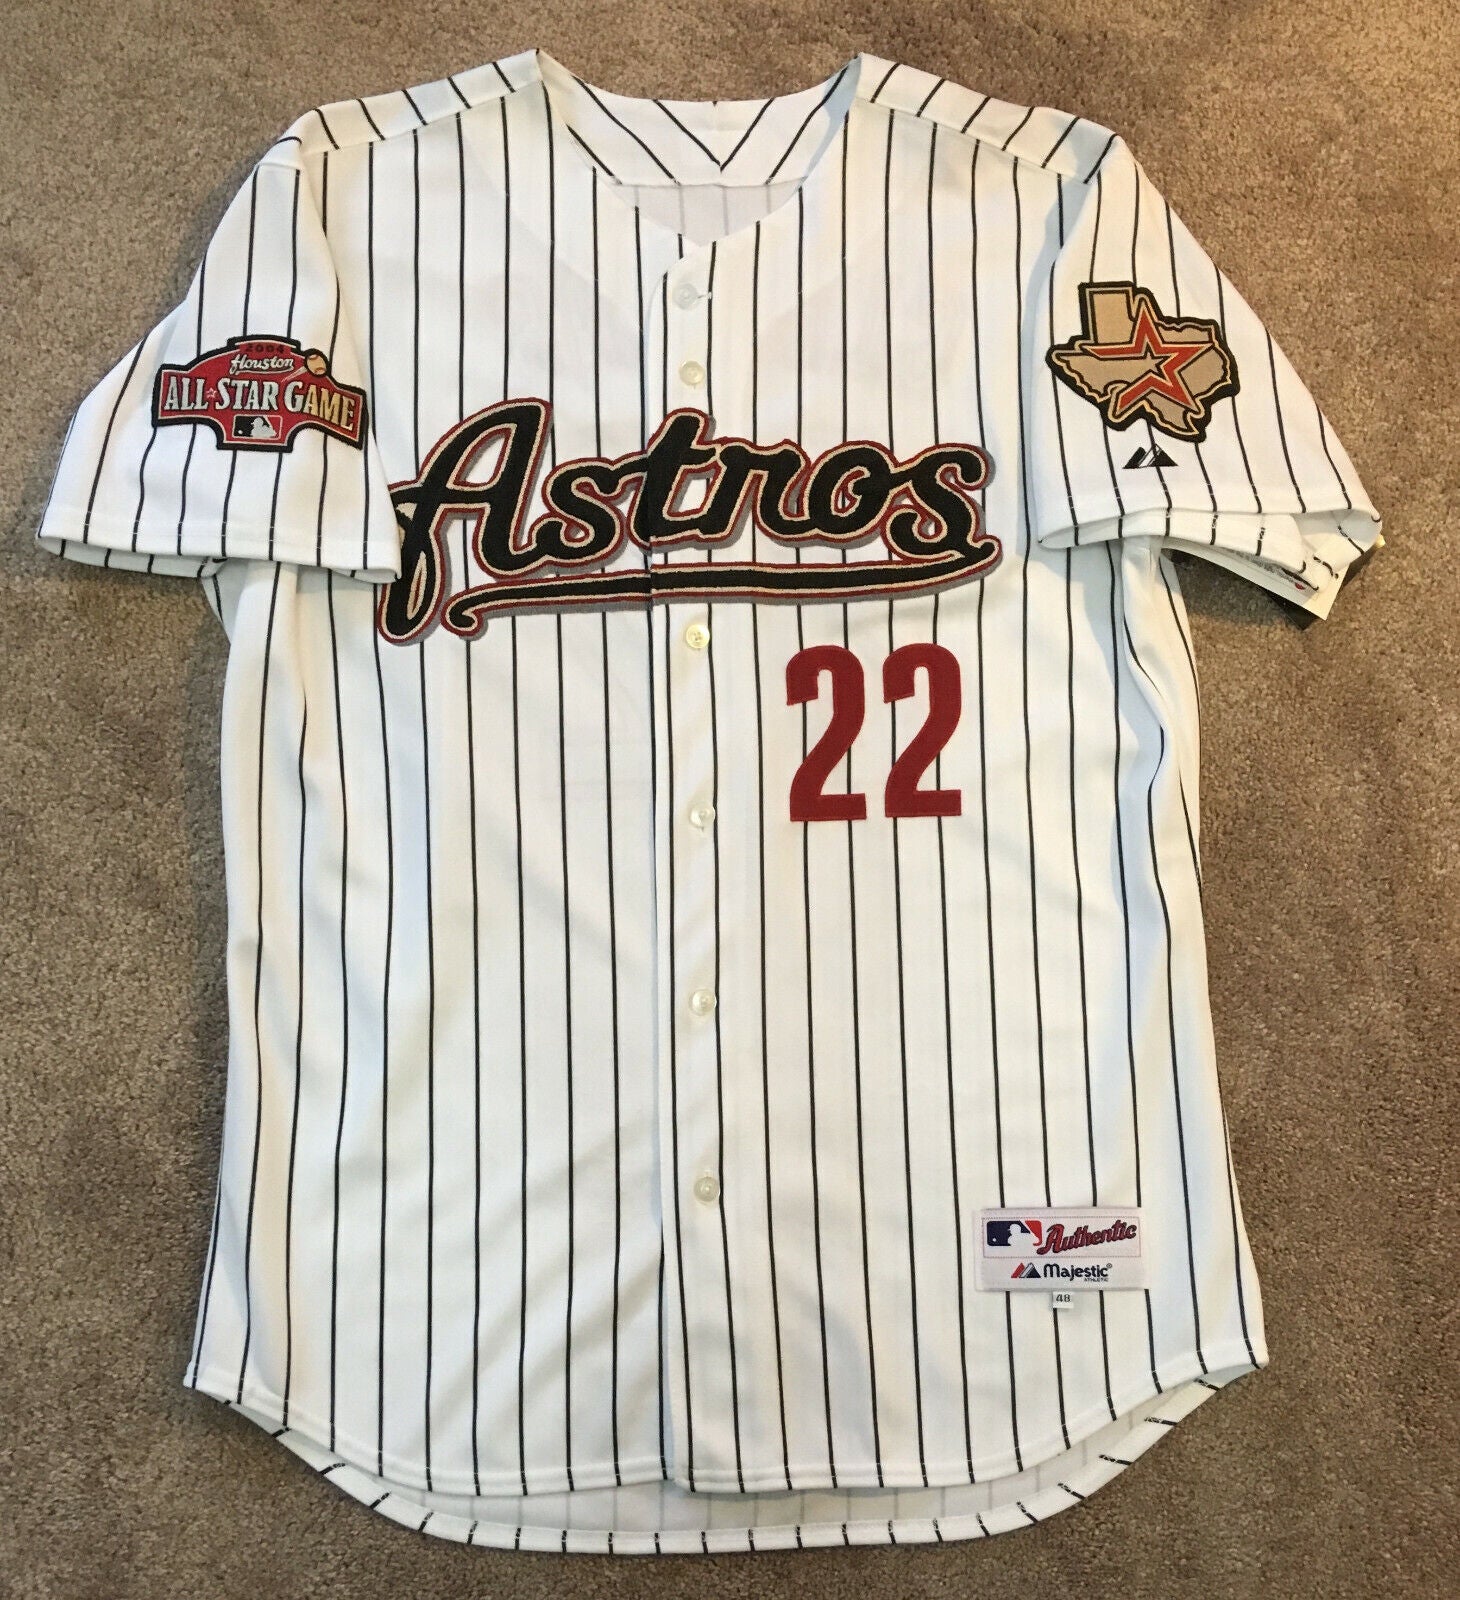 Roger Clemens Autographed Houston Astros 05 WS Jersey Inscribed Cy